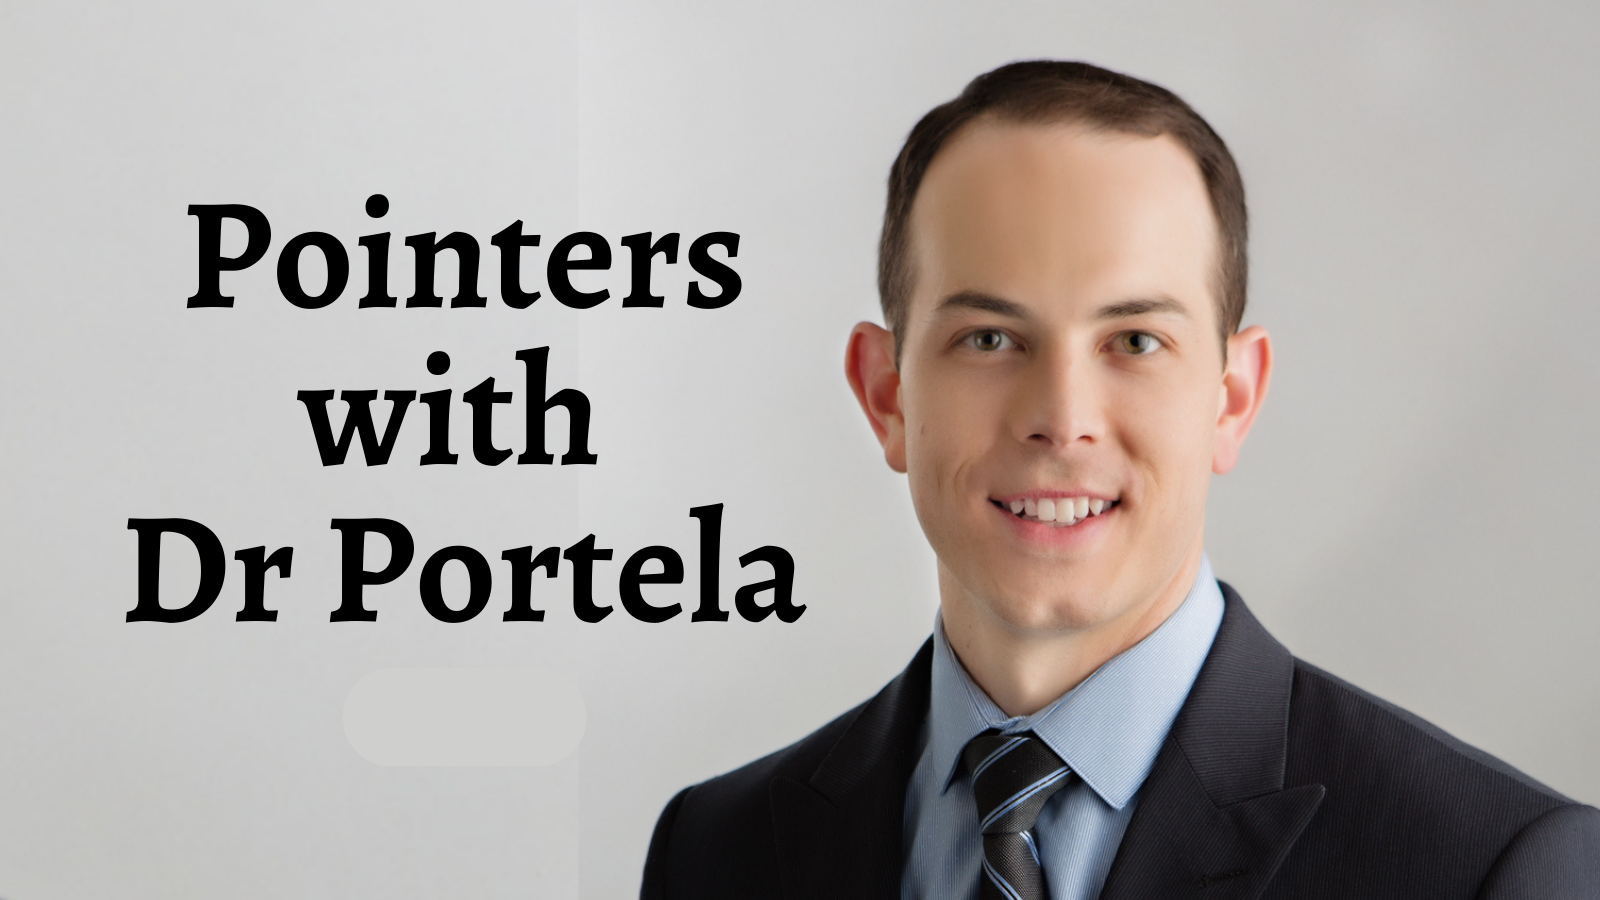 Pointers with Dr Portela: How BCC led to Disfiguration